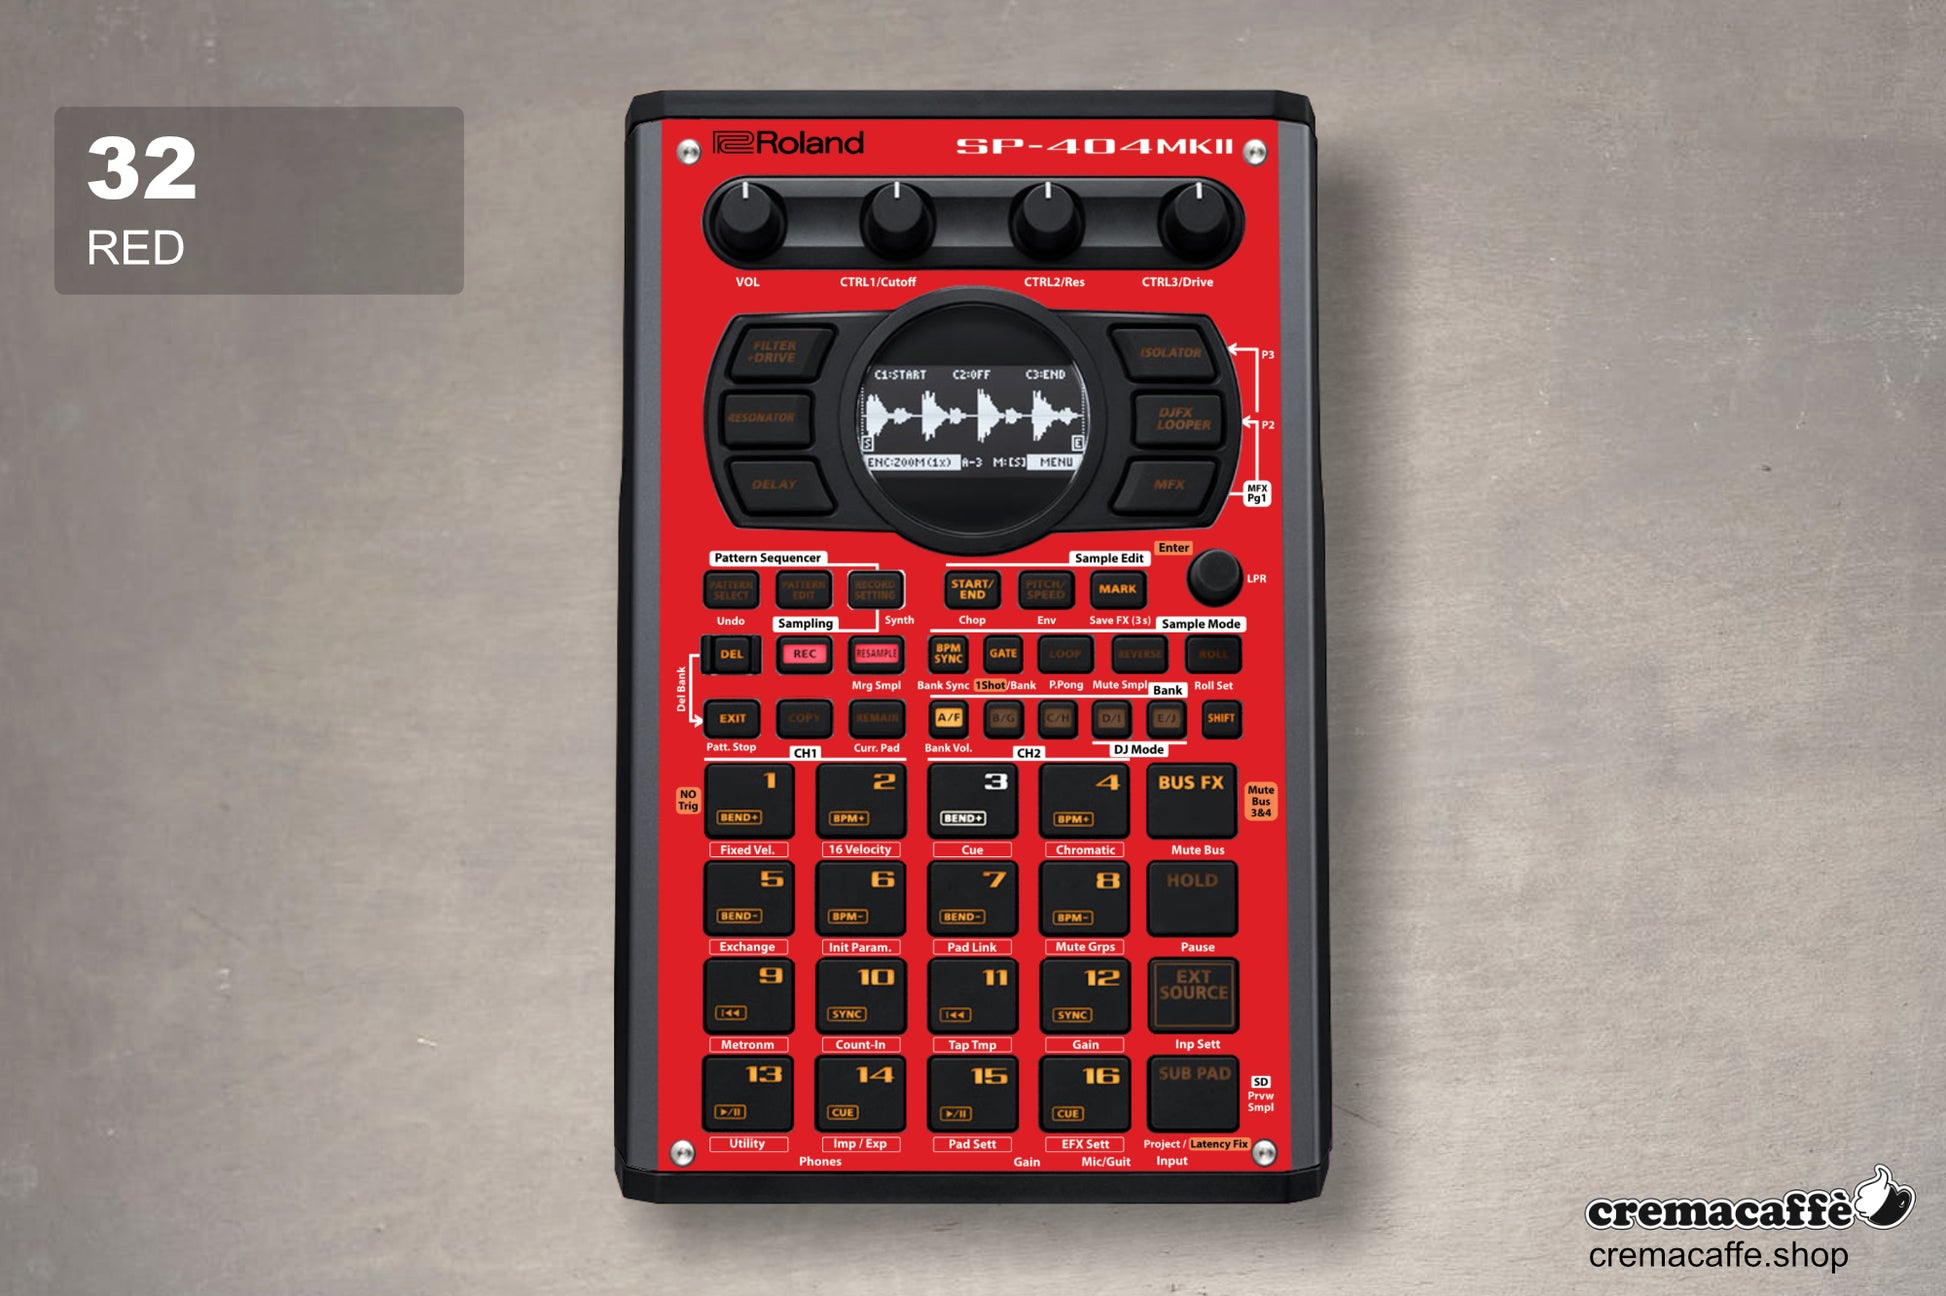 RED - DIY Skin for the Roland SP-404 MK2 by Cremacaffe Design